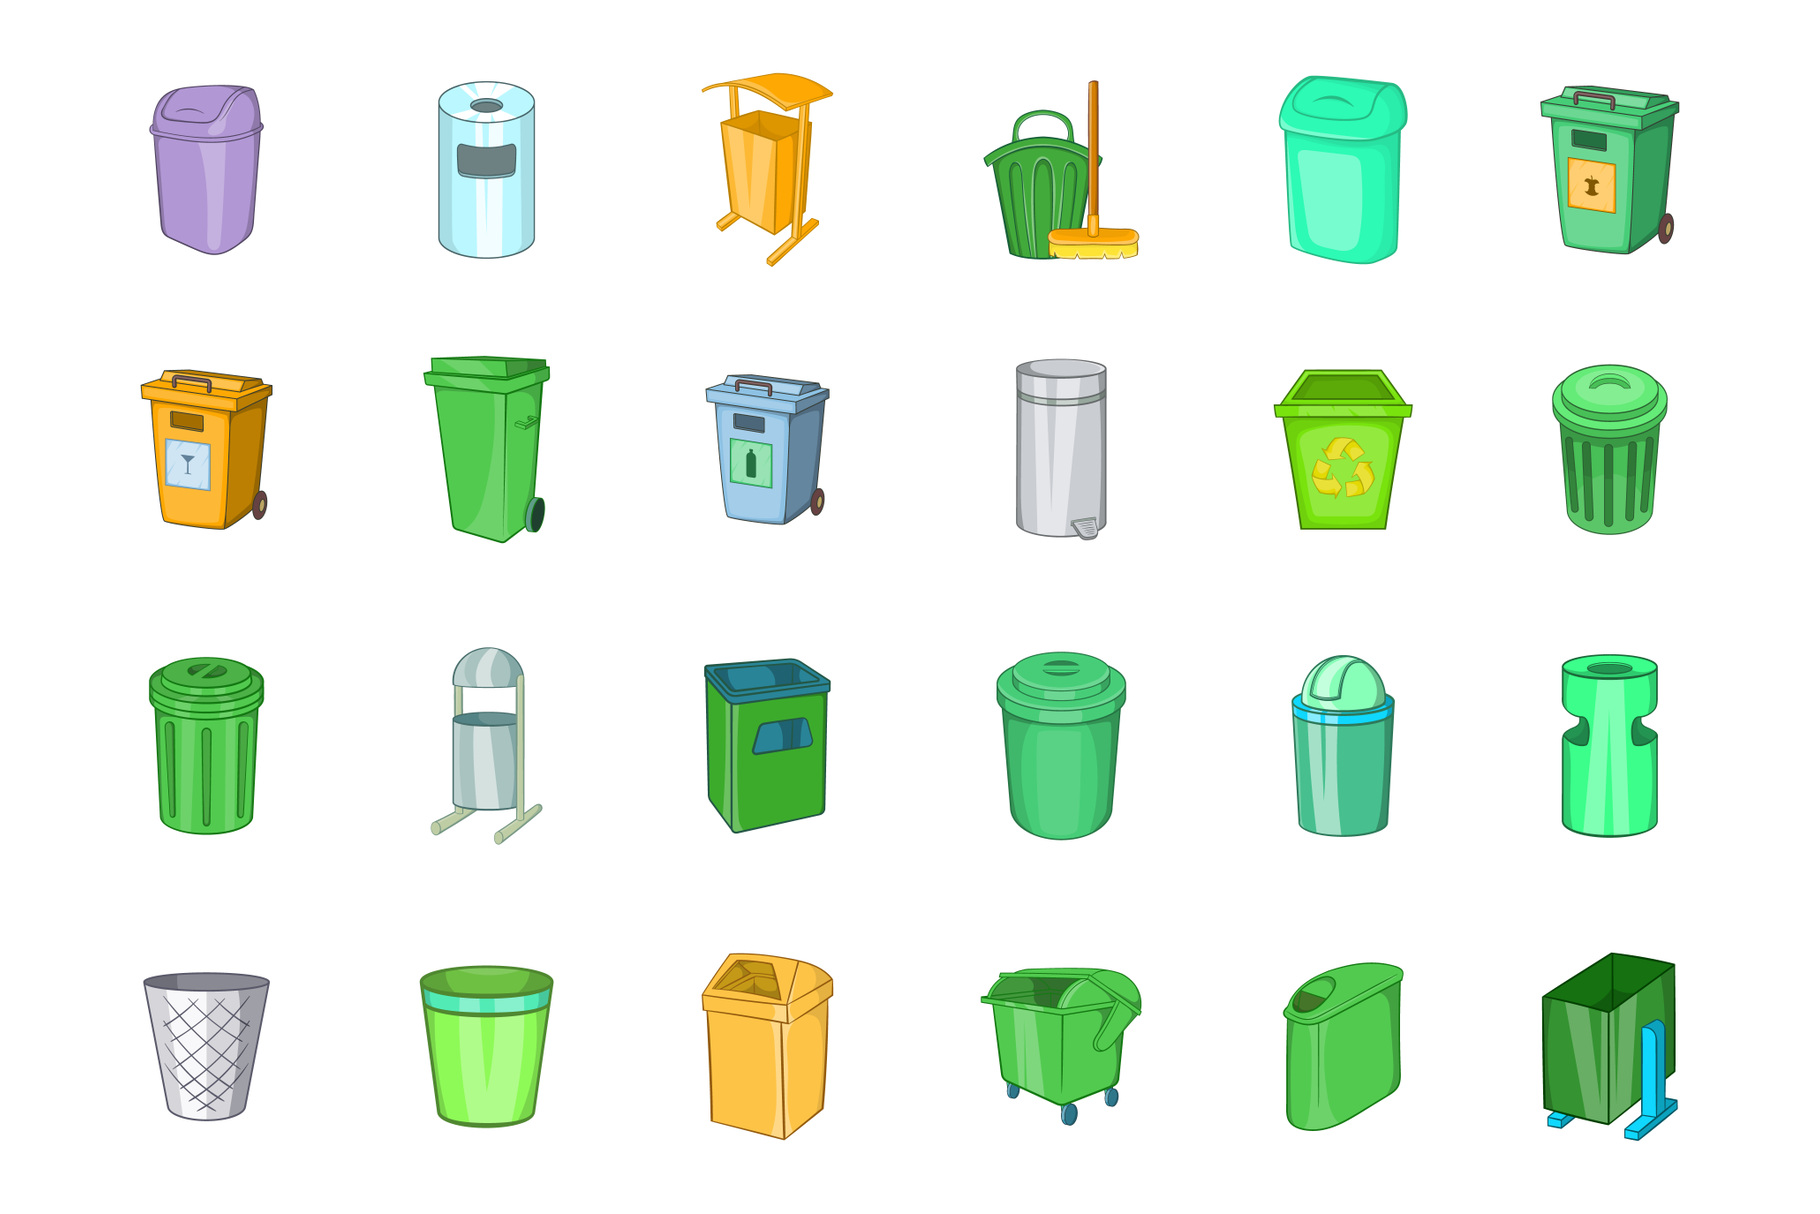 Garbage can icon set, cartoon style (373461) | Illustrations | Design